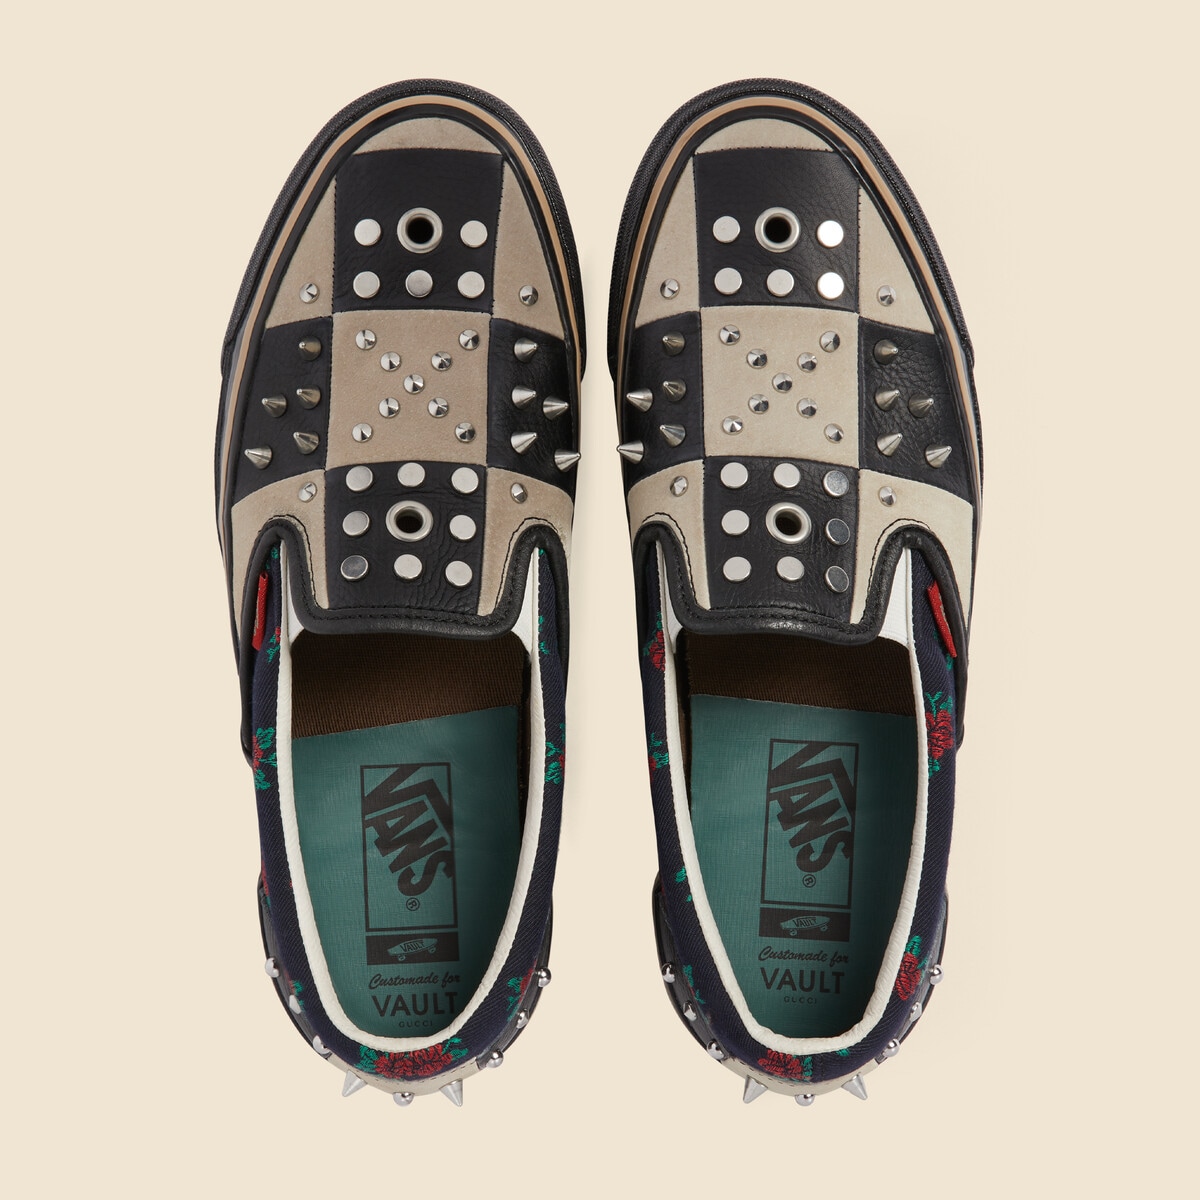 Gucci x Vans Now Has Unique Footwear Made With Metal Studs